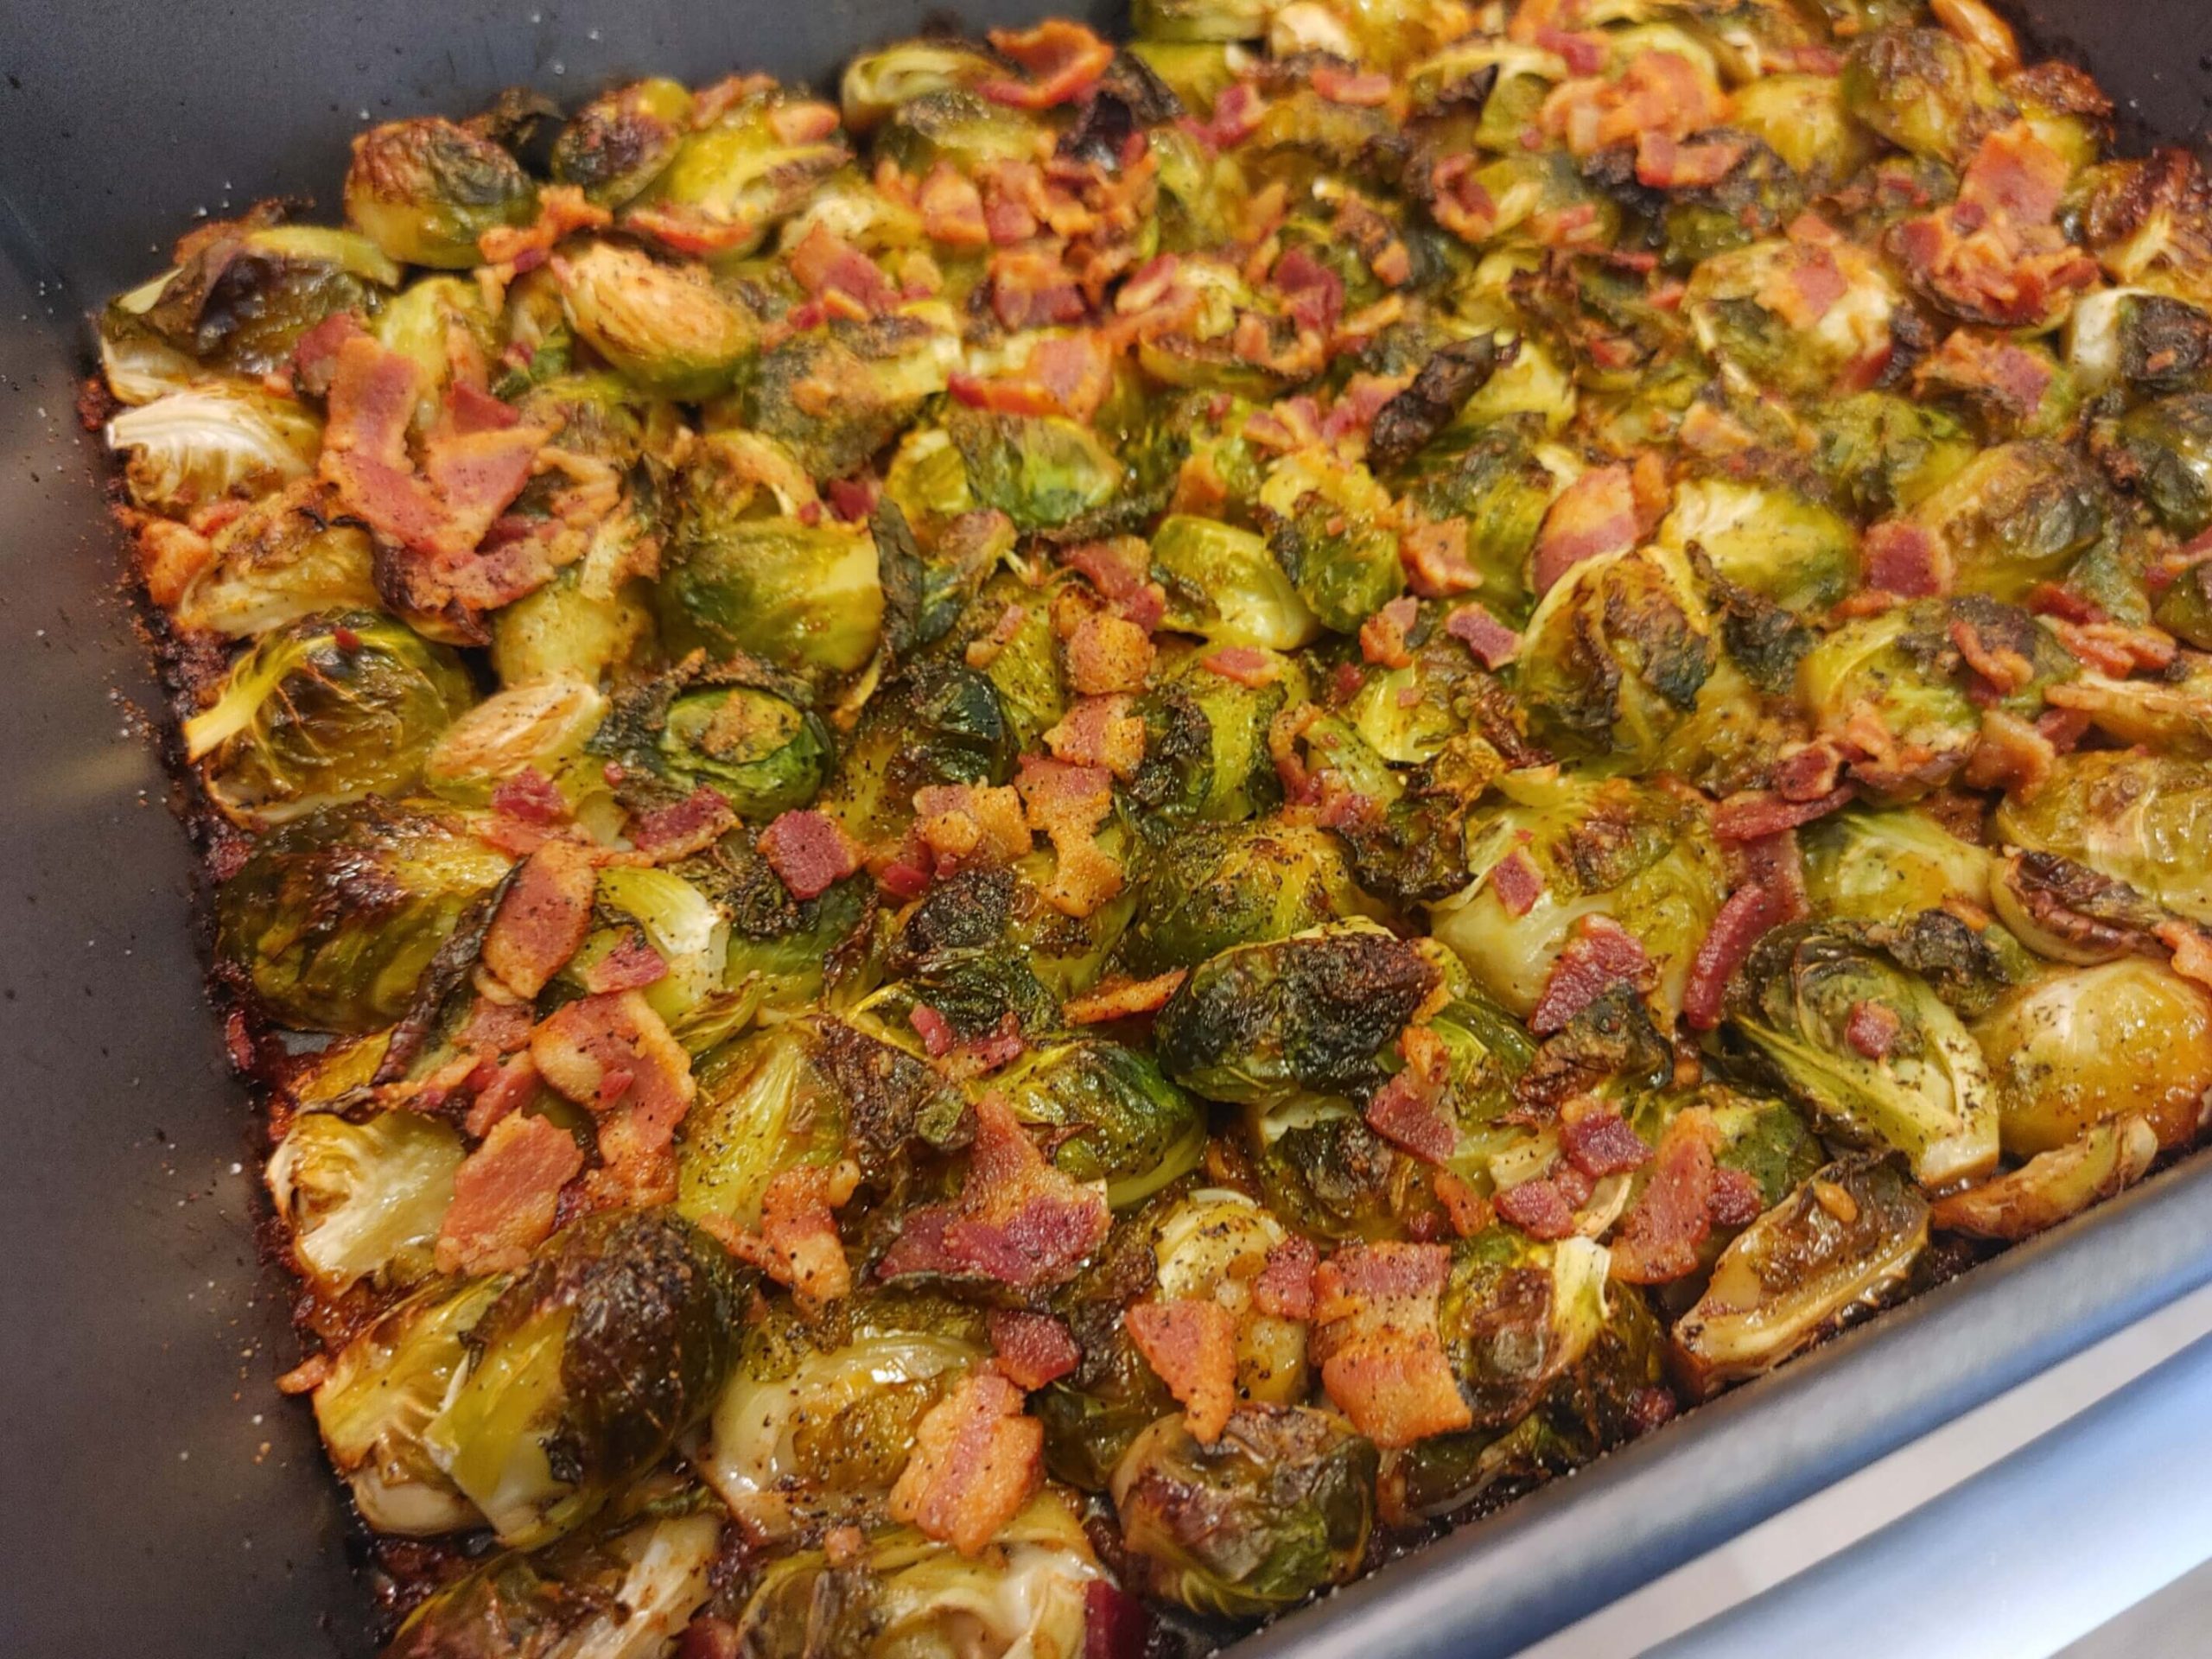 BAKED BRUSSELS SPROUTS